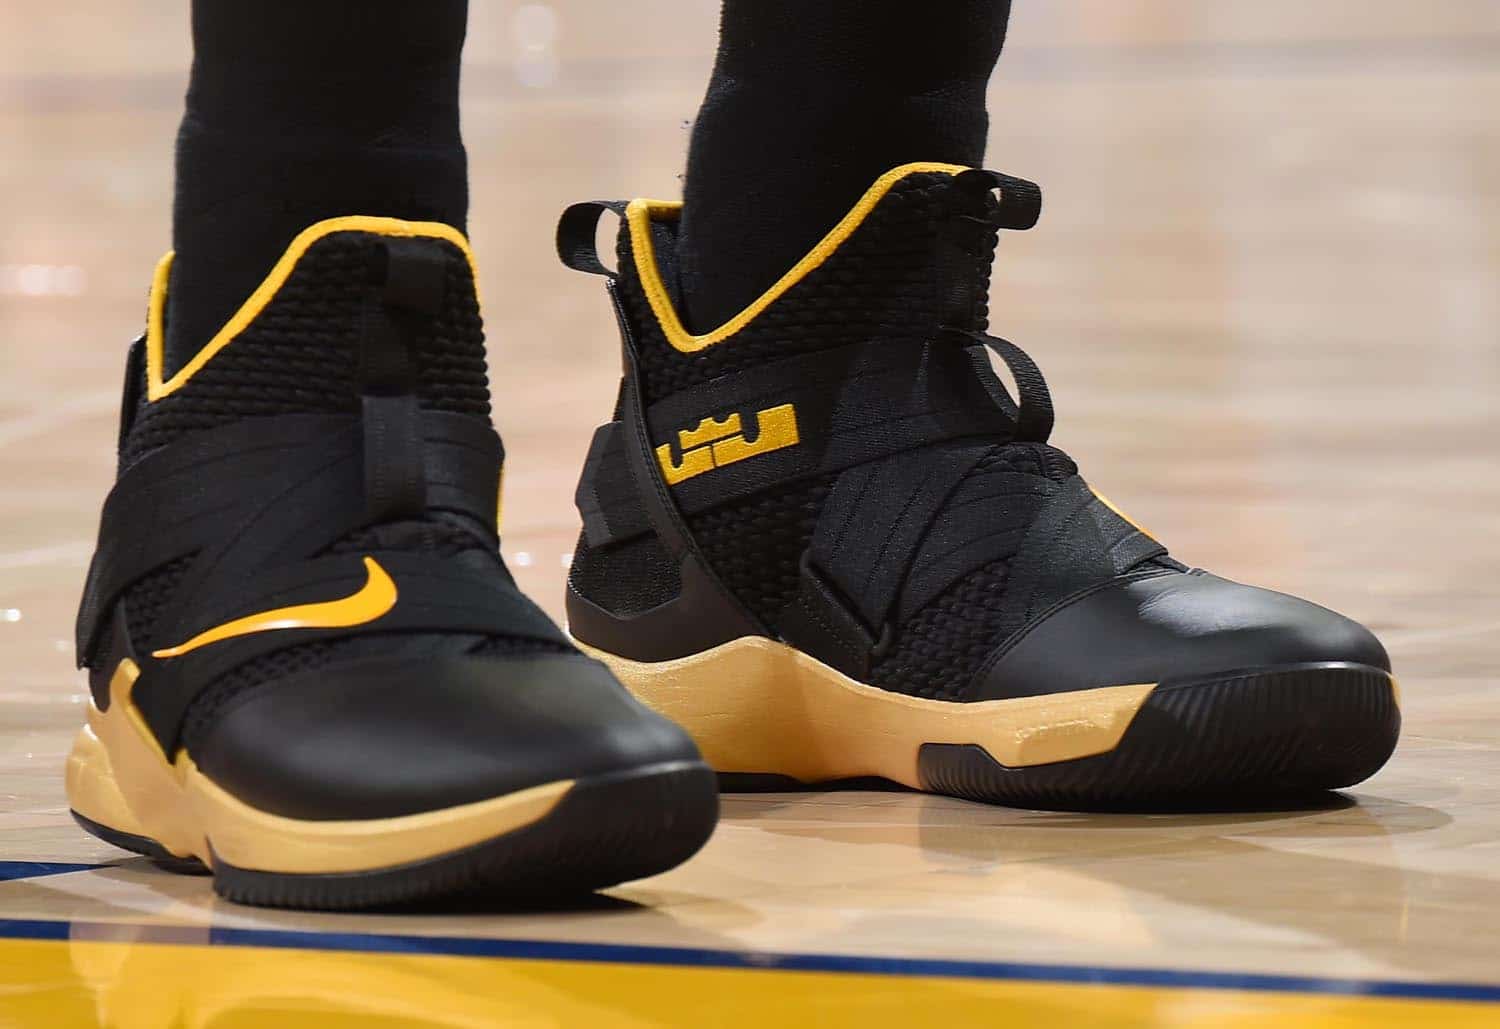 J.R. Smith Has His Own Nike LeBron Sneakers for the NBA Finals